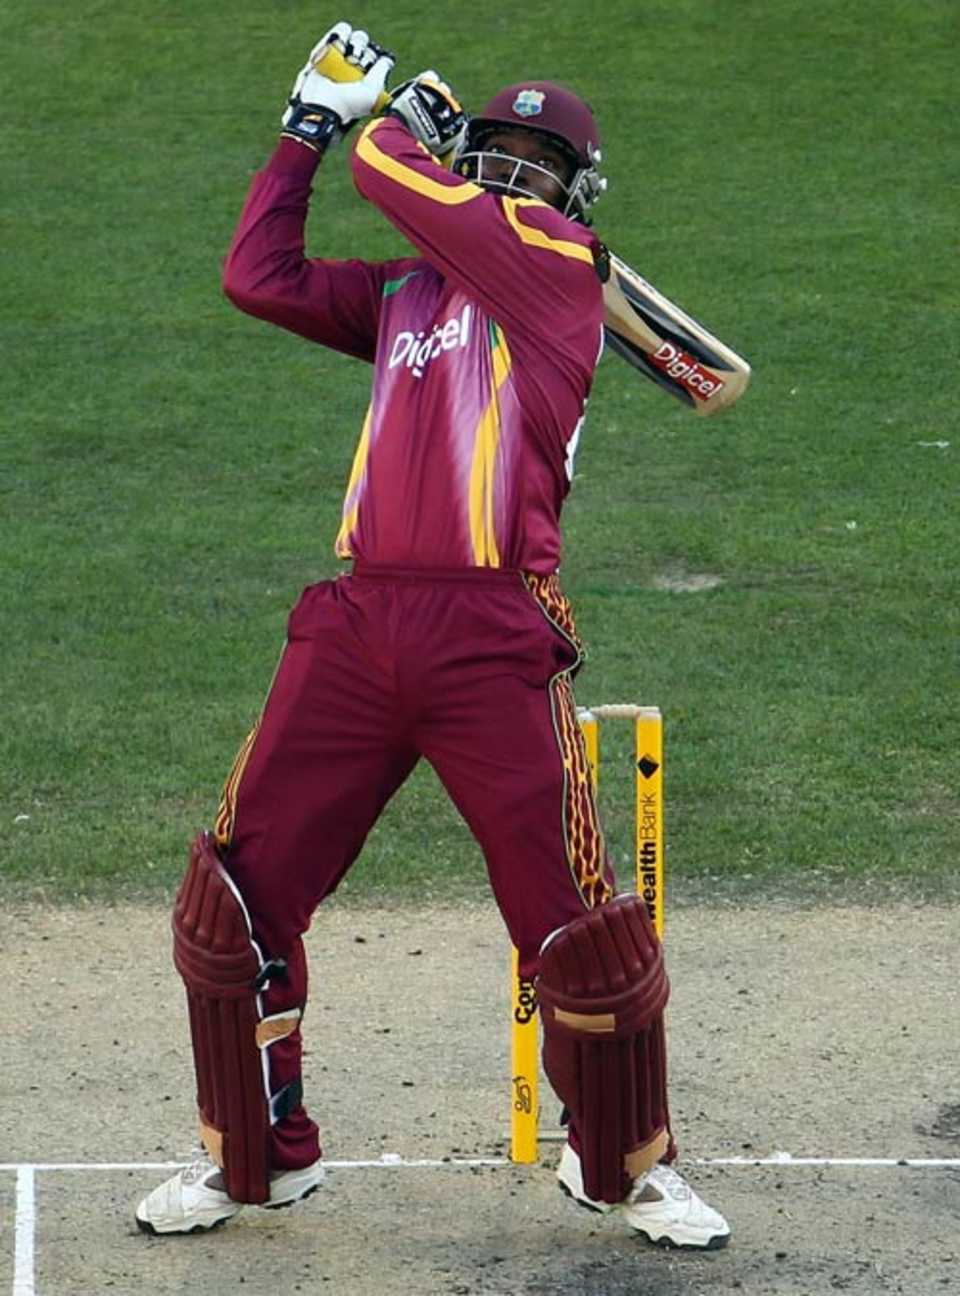 Chris Gayle skies an attempted pull, Australia v West Indies, 1st ODI, Melbourne, February 7, 2010